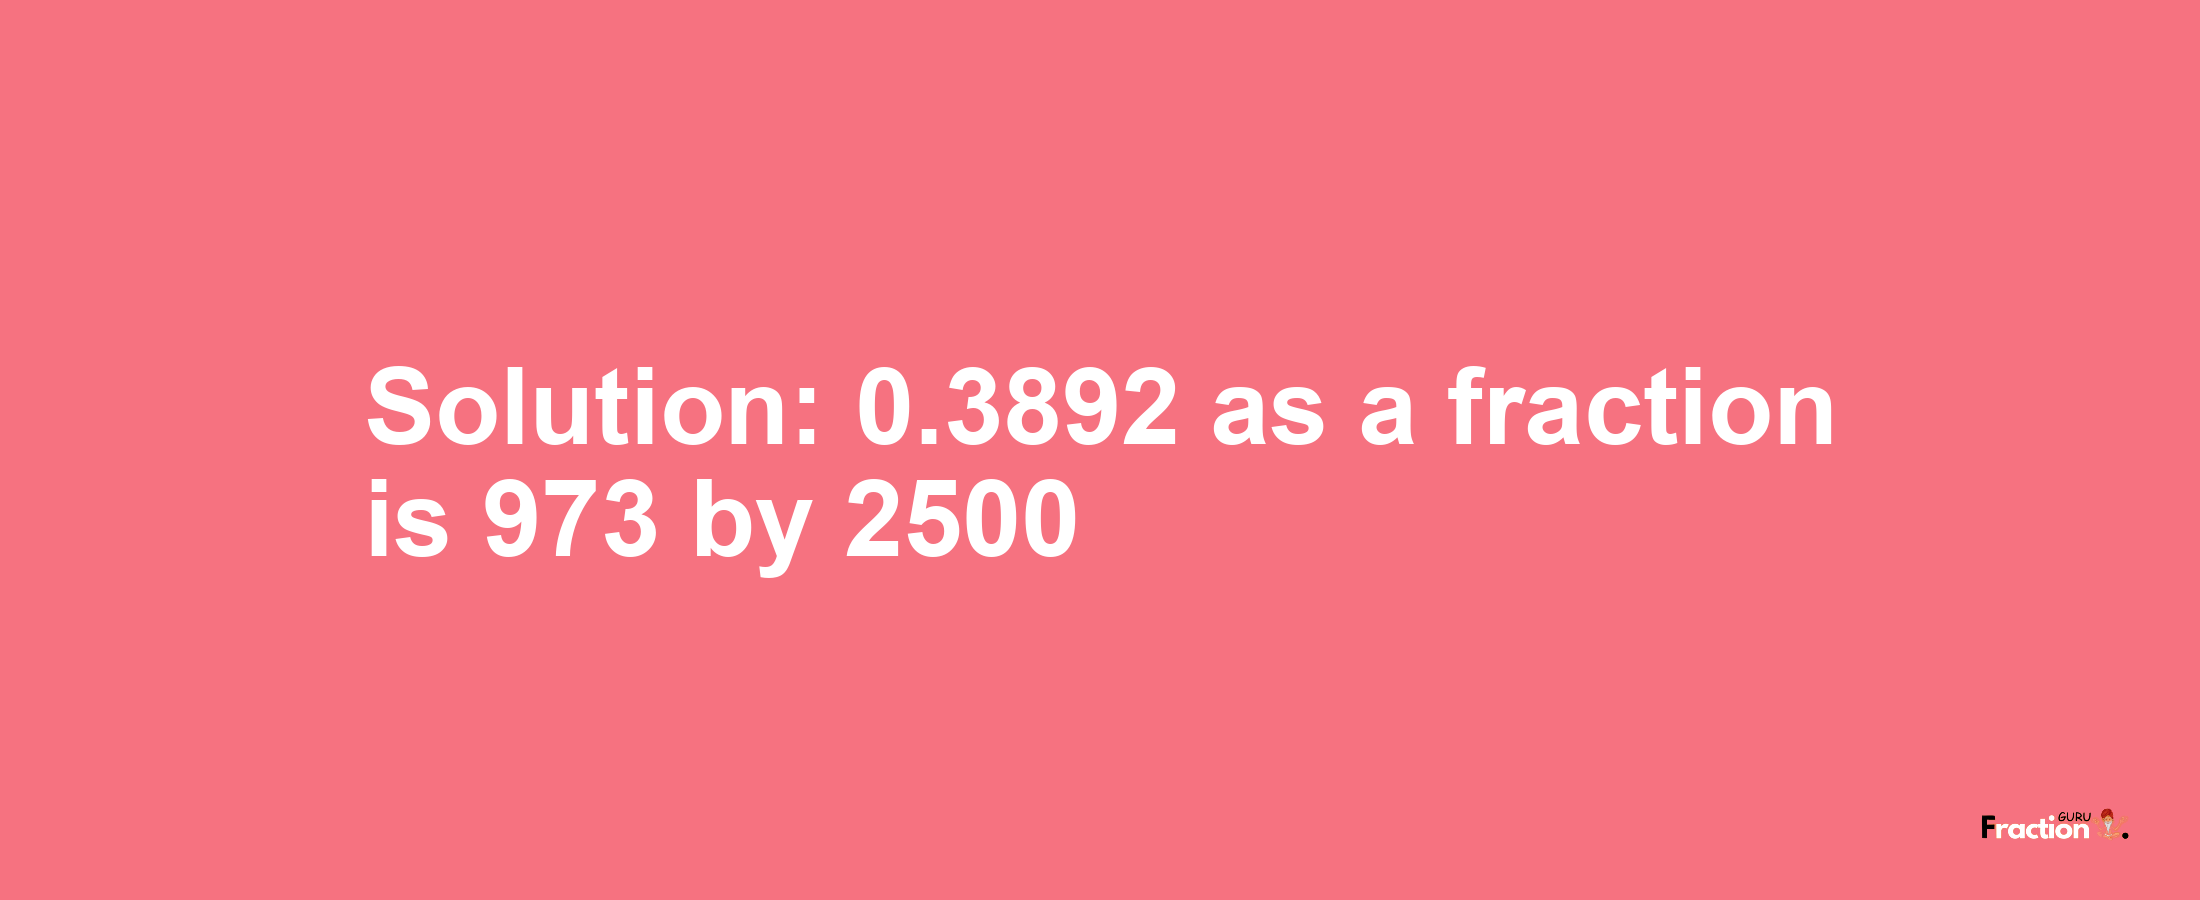 Solution:0.3892 as a fraction is 973/2500